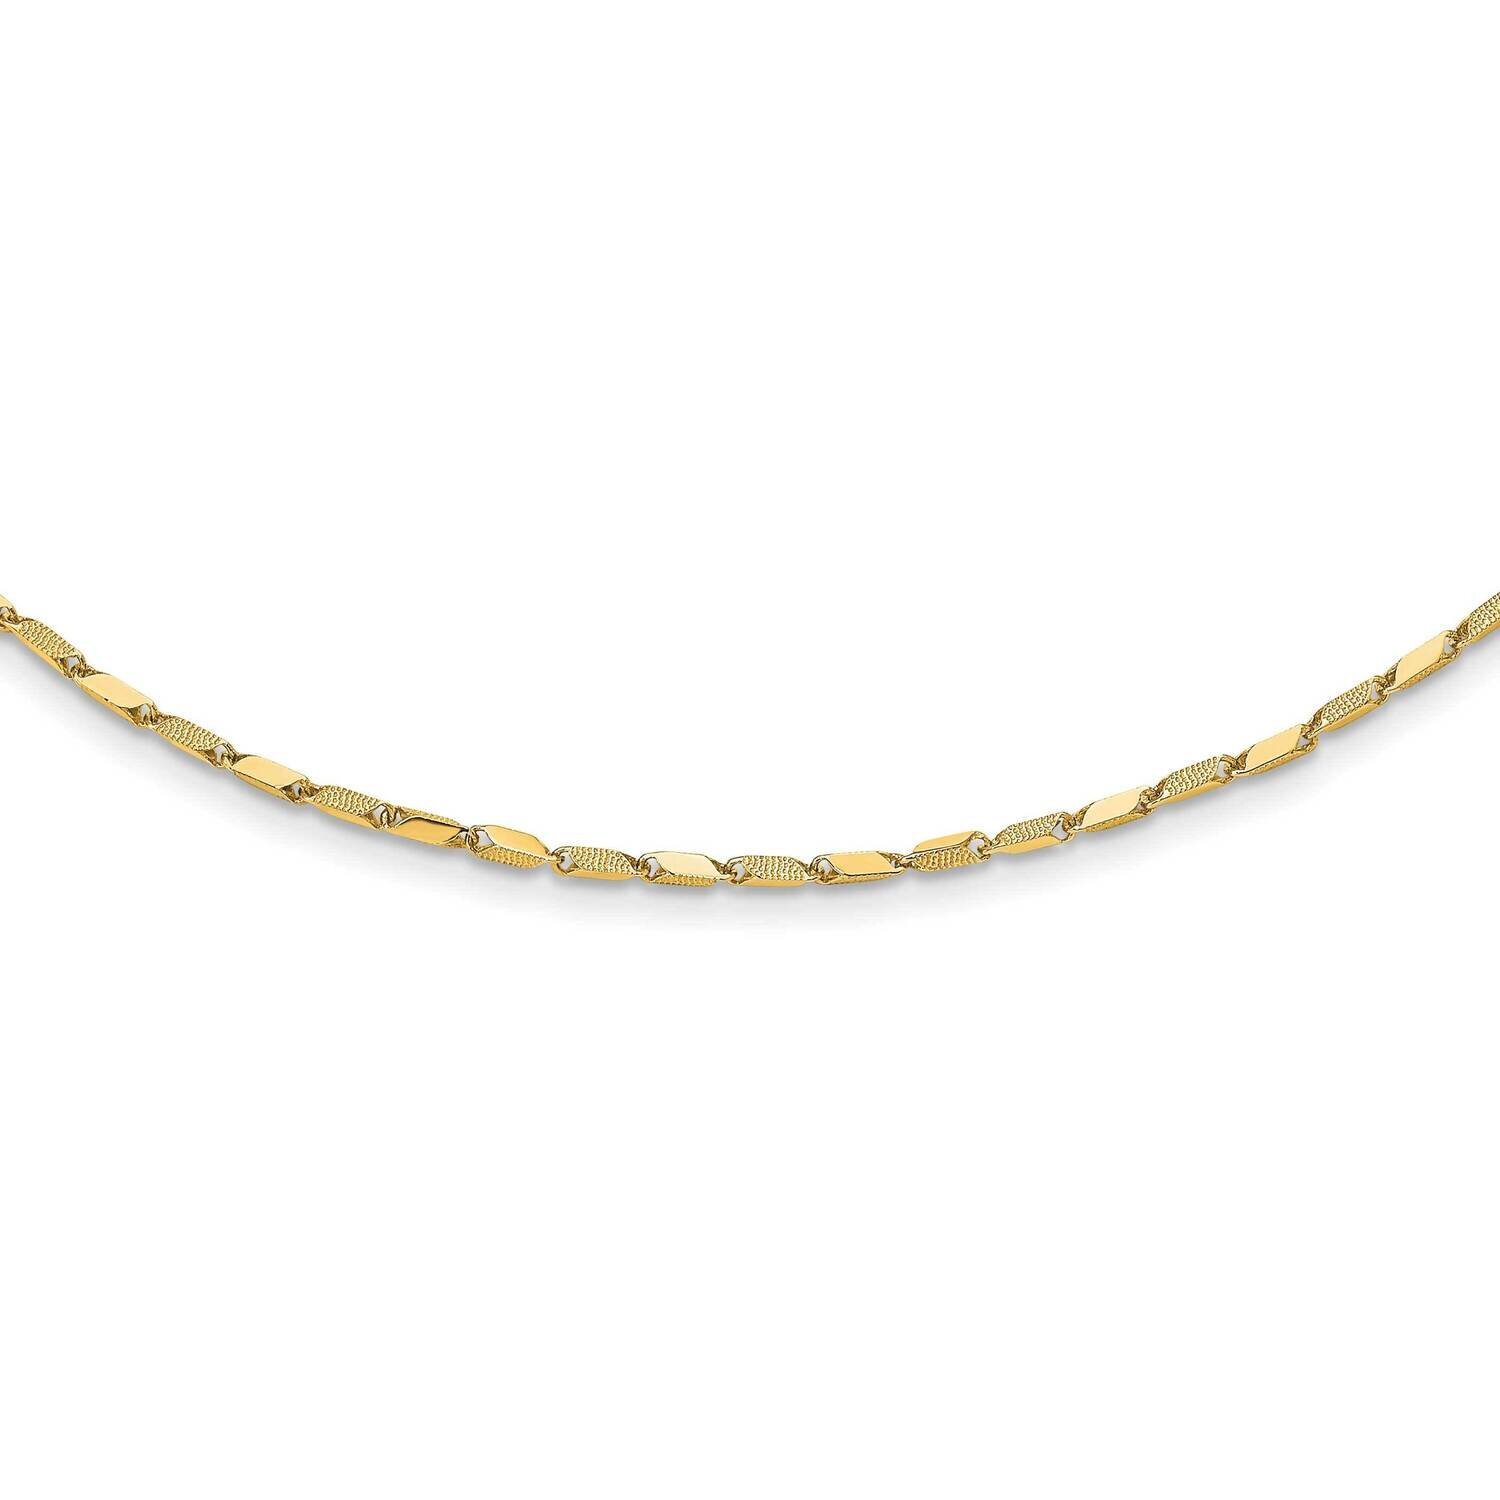 Textured Fancy Link 17 Inch Necklace 14k Gold Polished SF2955-17